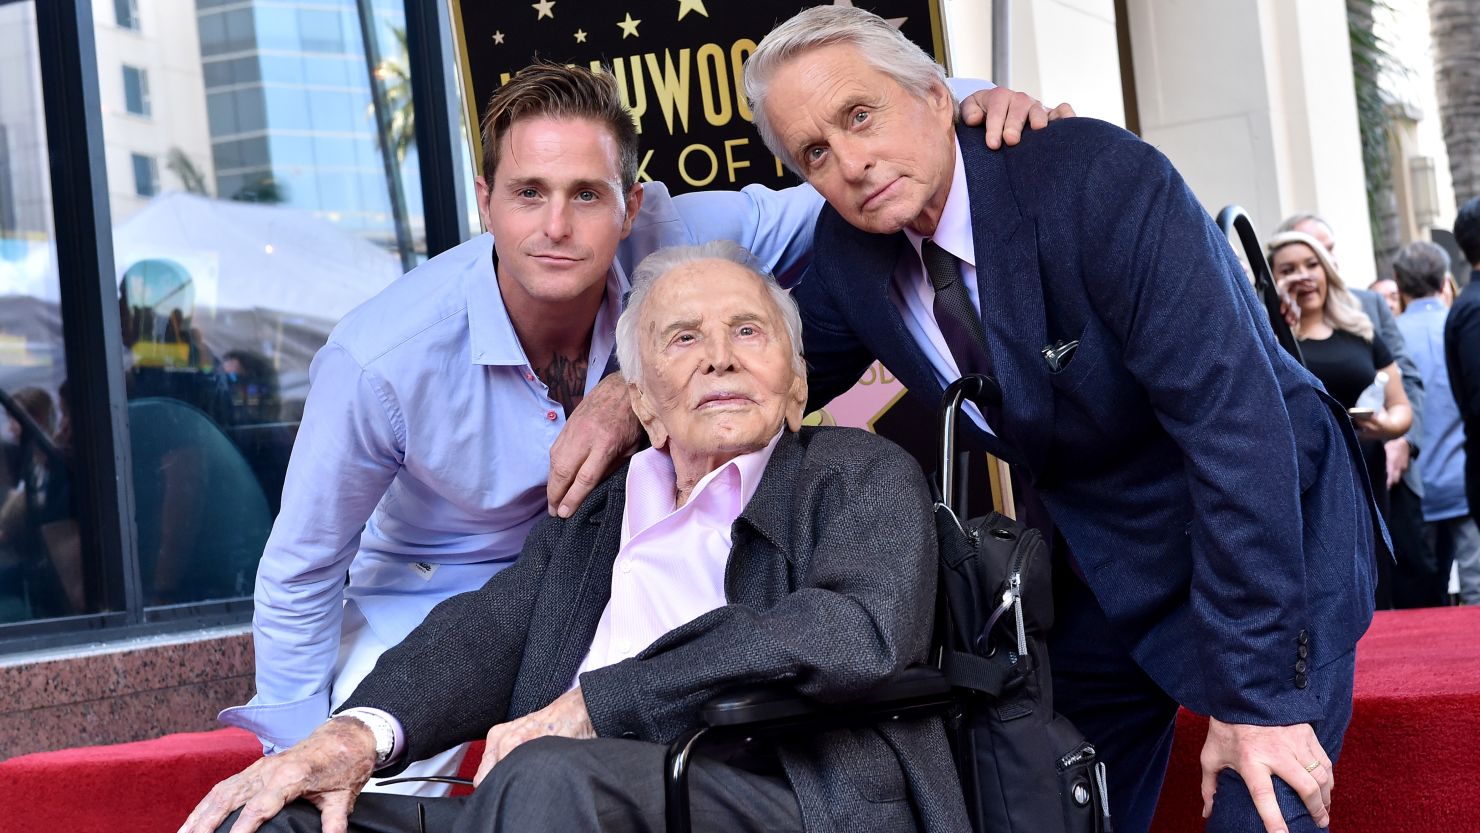 Cameron Douglas, Kirk Douglas and Michael Douglas attend the ceremony honoring Michael Douglas with star on the Hollywood Walk of Fame on November 06, 2018 in Hollywood, California. 